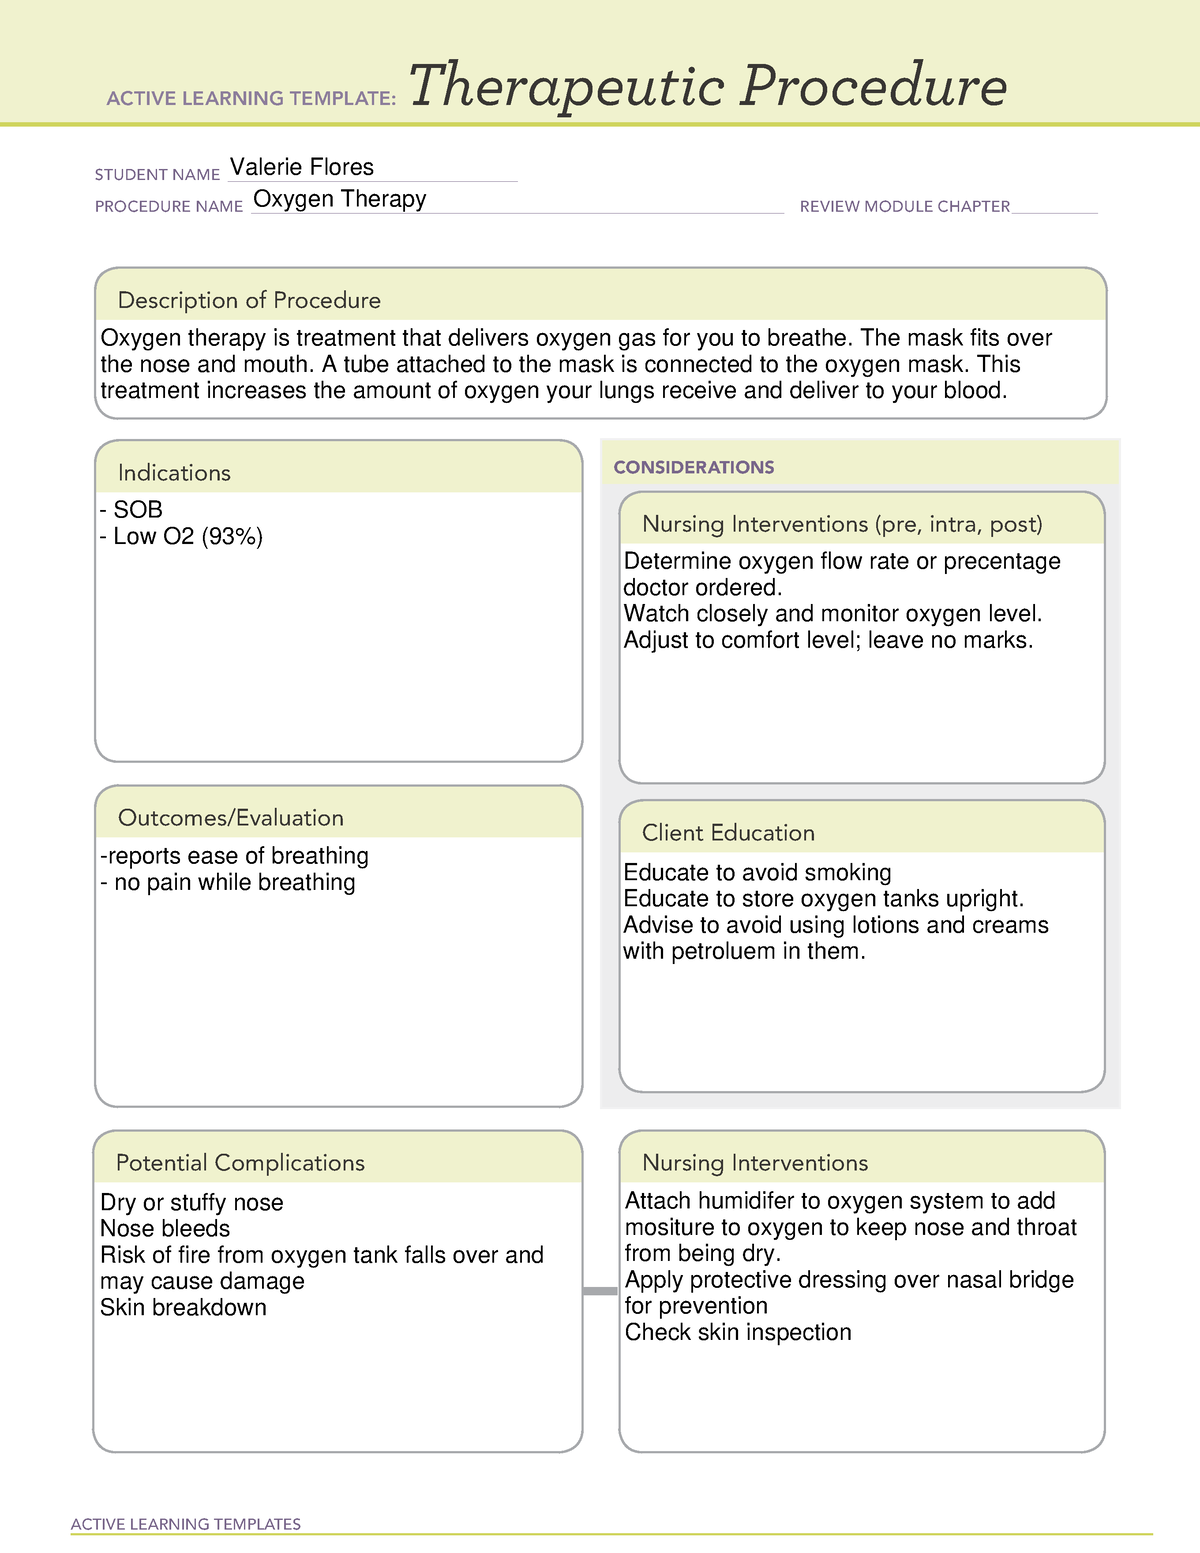 ati-theraputic-oxygen-therapy-active-learning-templates-therapeutic-procedure-student-name